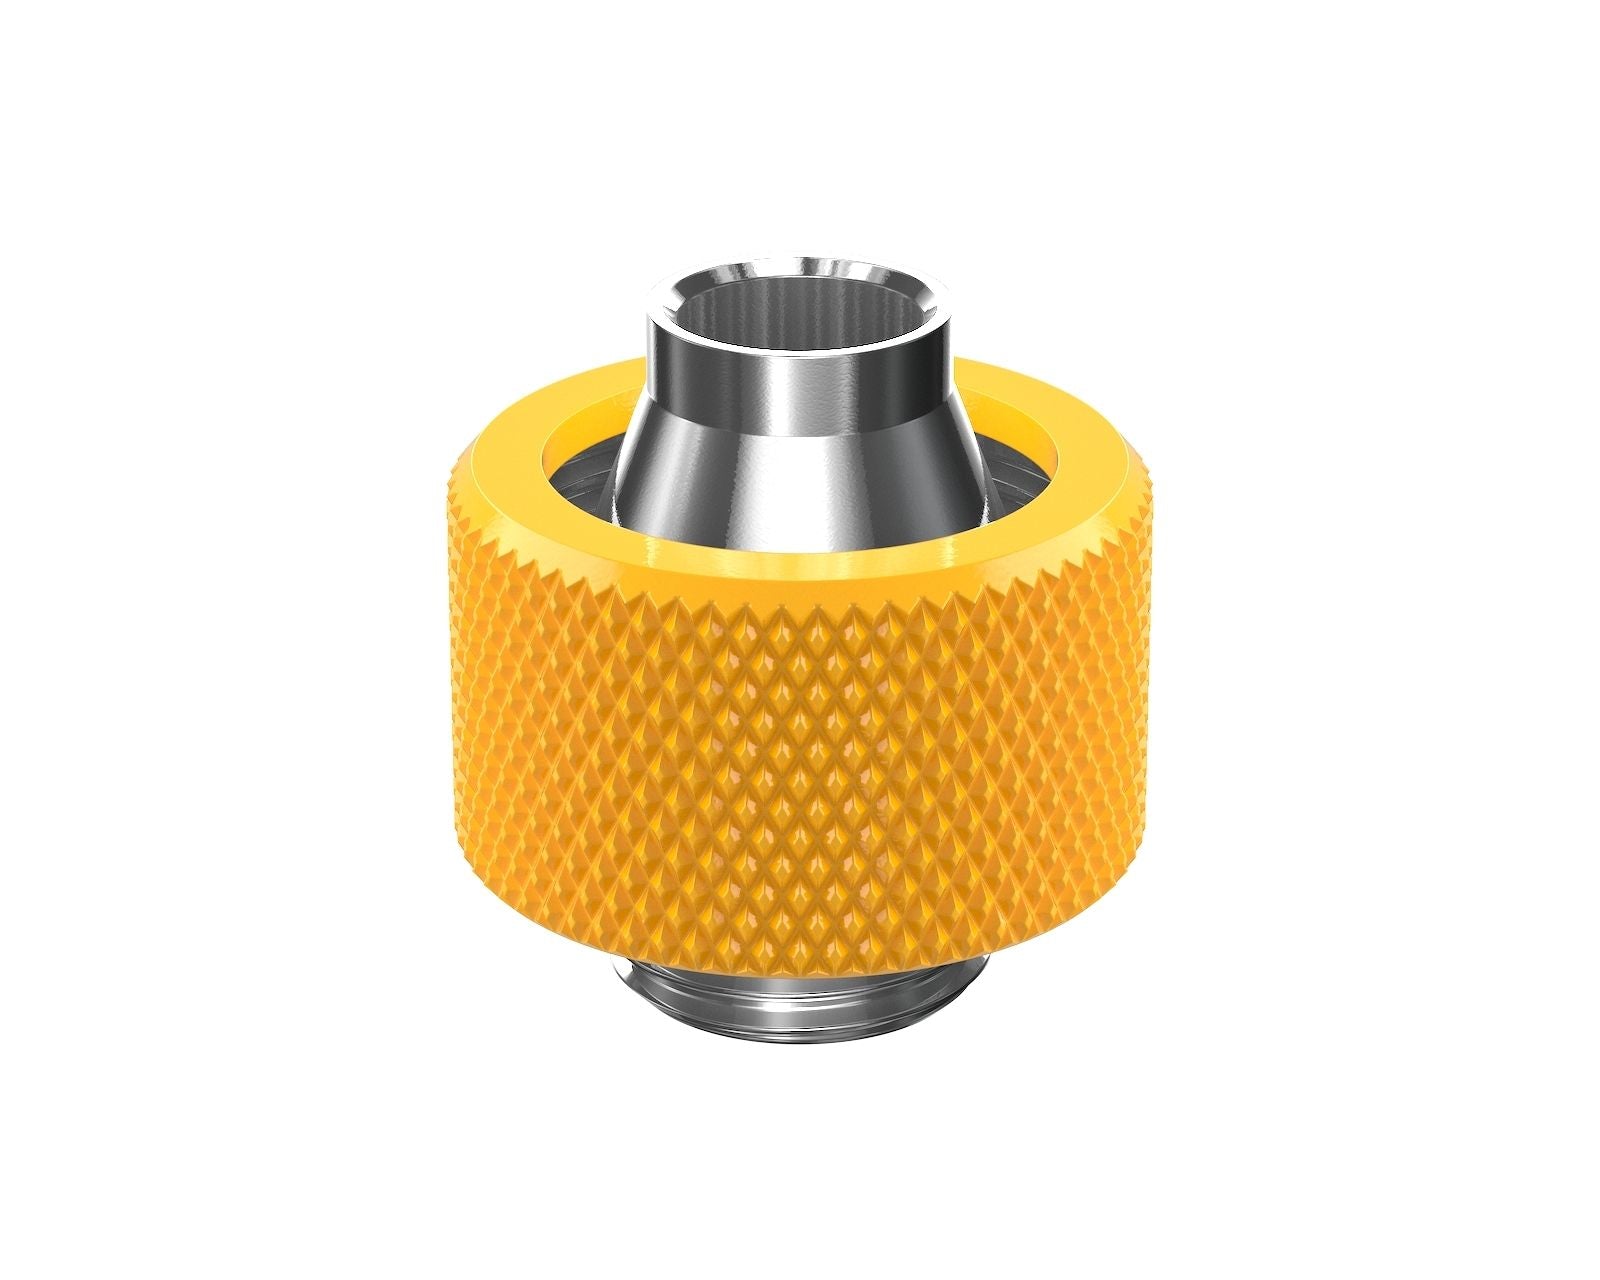 PrimoChill SecureFit SX - Premium Compression Fitting For 7/16in ID x 5/8in OD Flexible Tubing (F-SFSX758) - Available in 20+ Colors, Custom Watercooling Loop Ready - Yellow